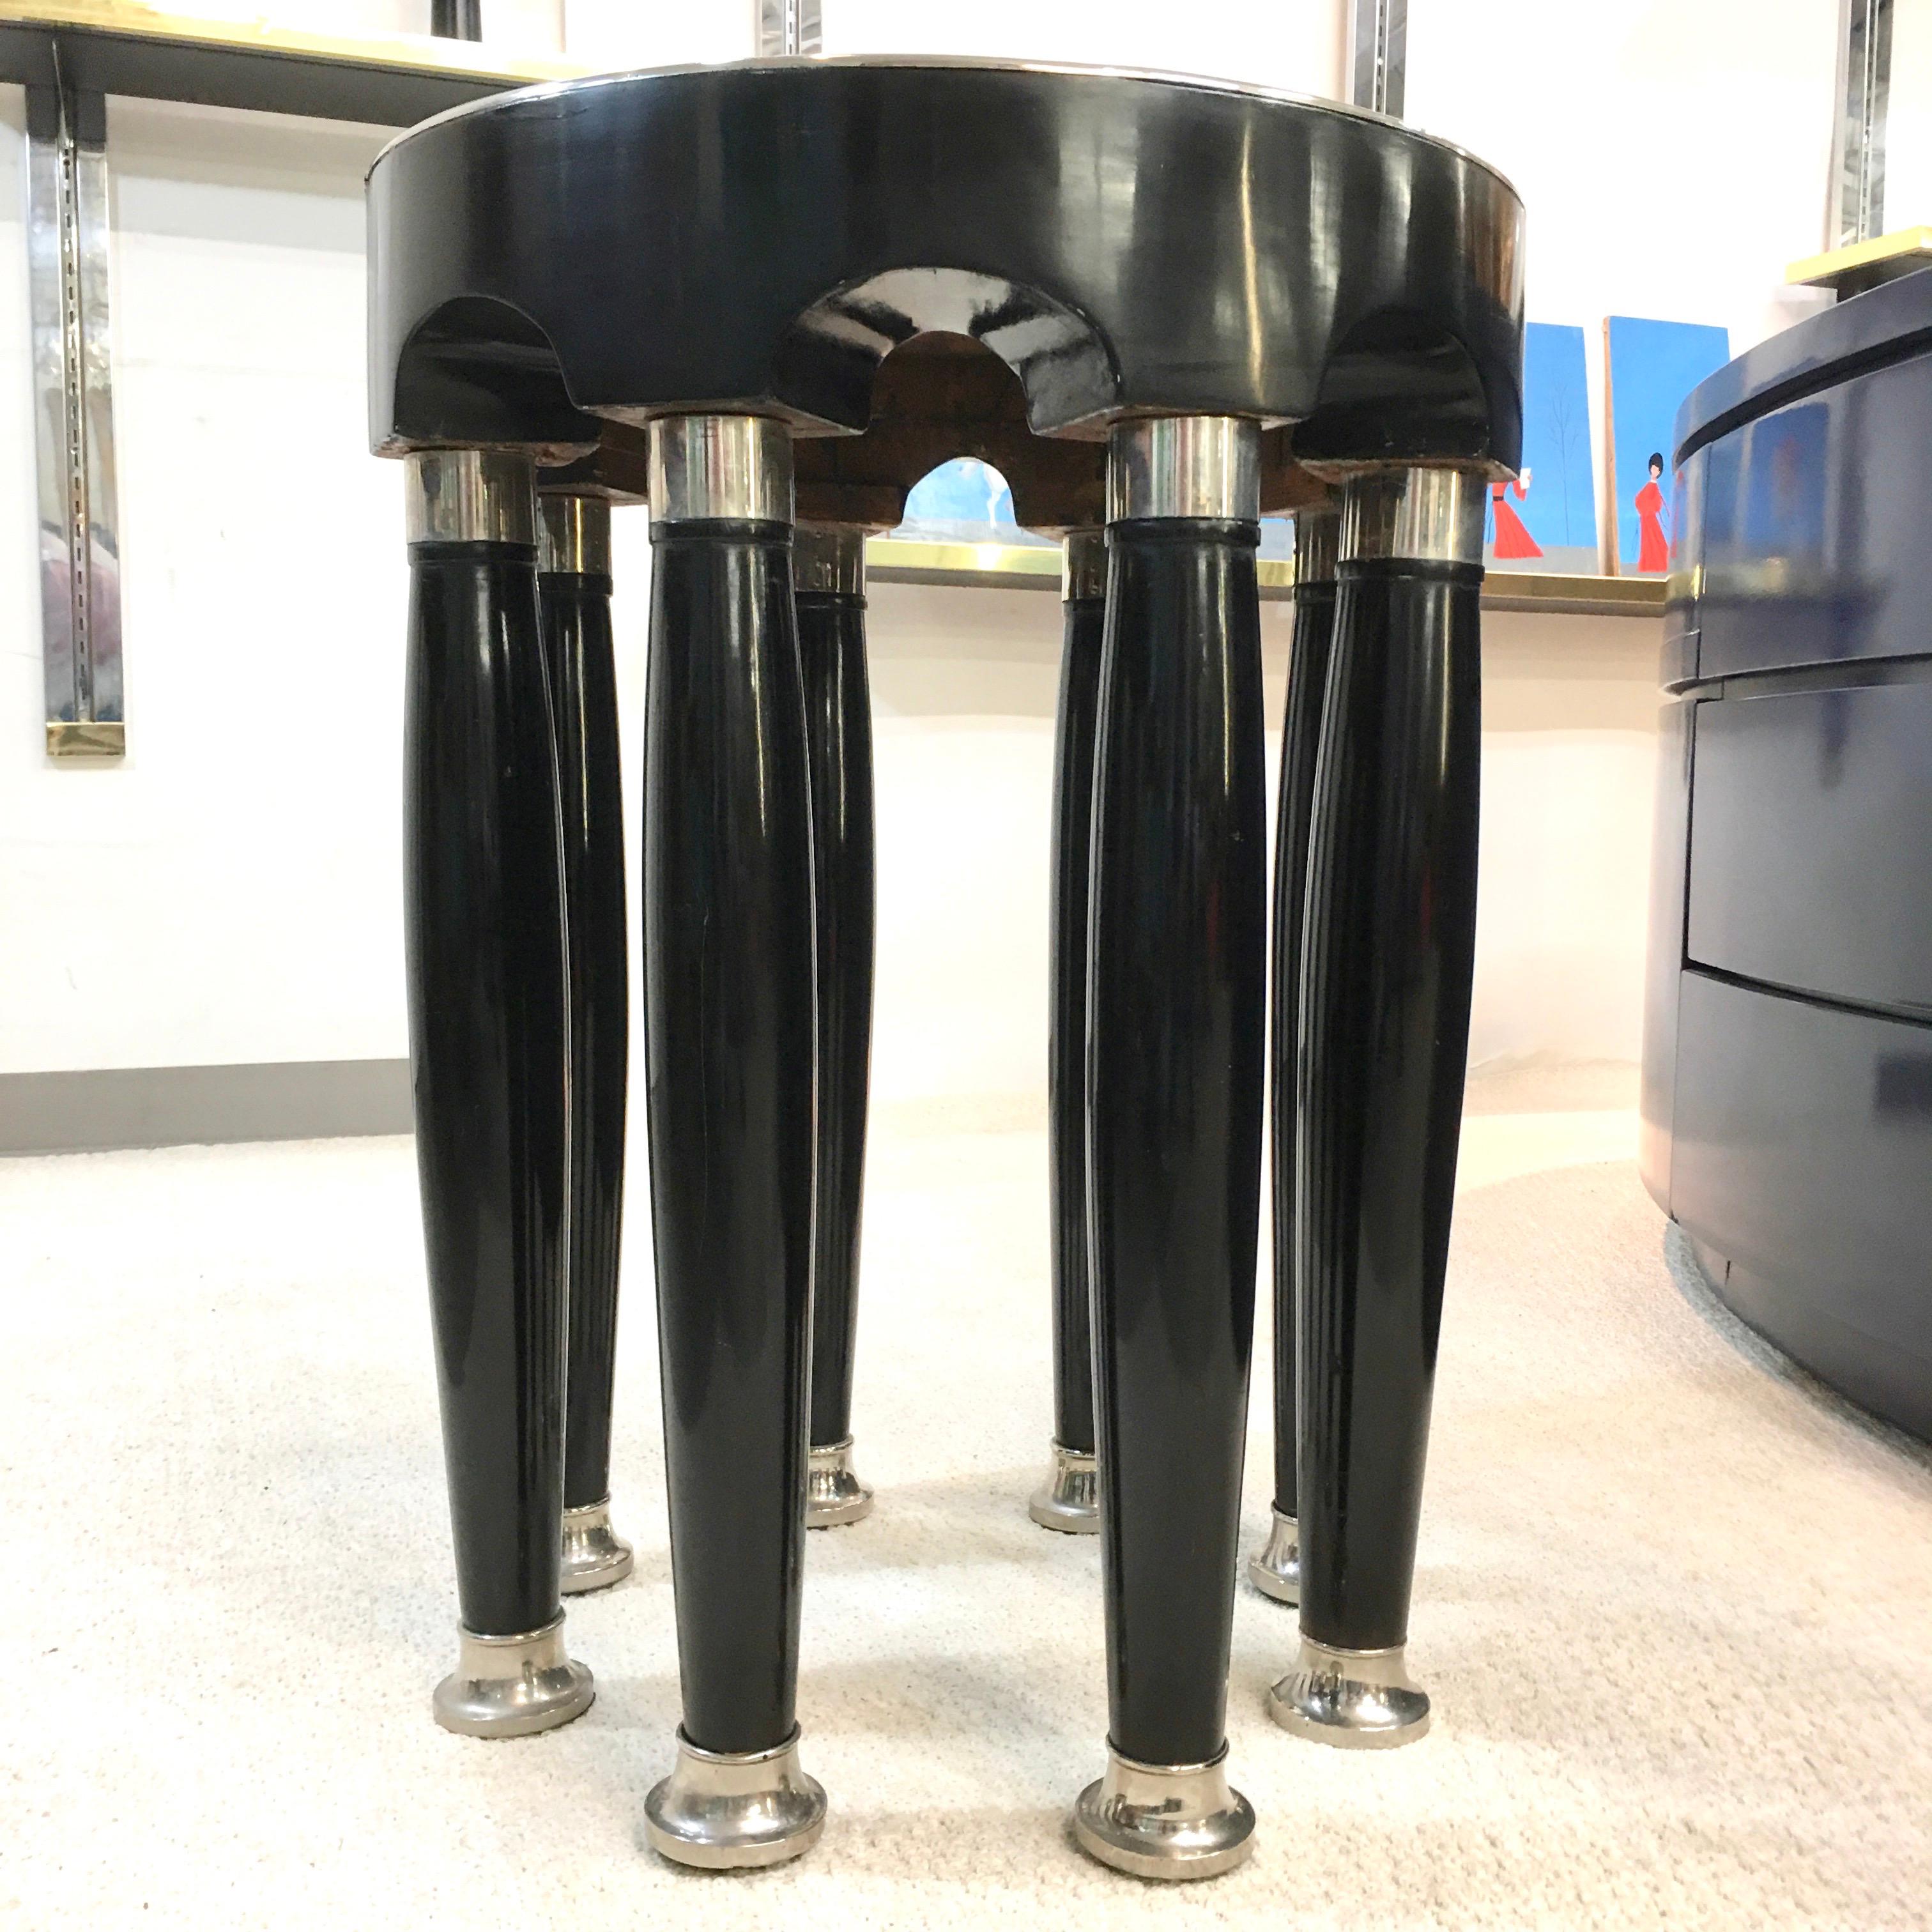 An eight-columned avant-garde round table attributed to Adolf Loos and executed by the Viennese firm of Friedrich Otto Schmidt. 
Polished black enamel over hardwood and veneer with polished chrome cuffs and sabots.
Adolf Loos used variations of